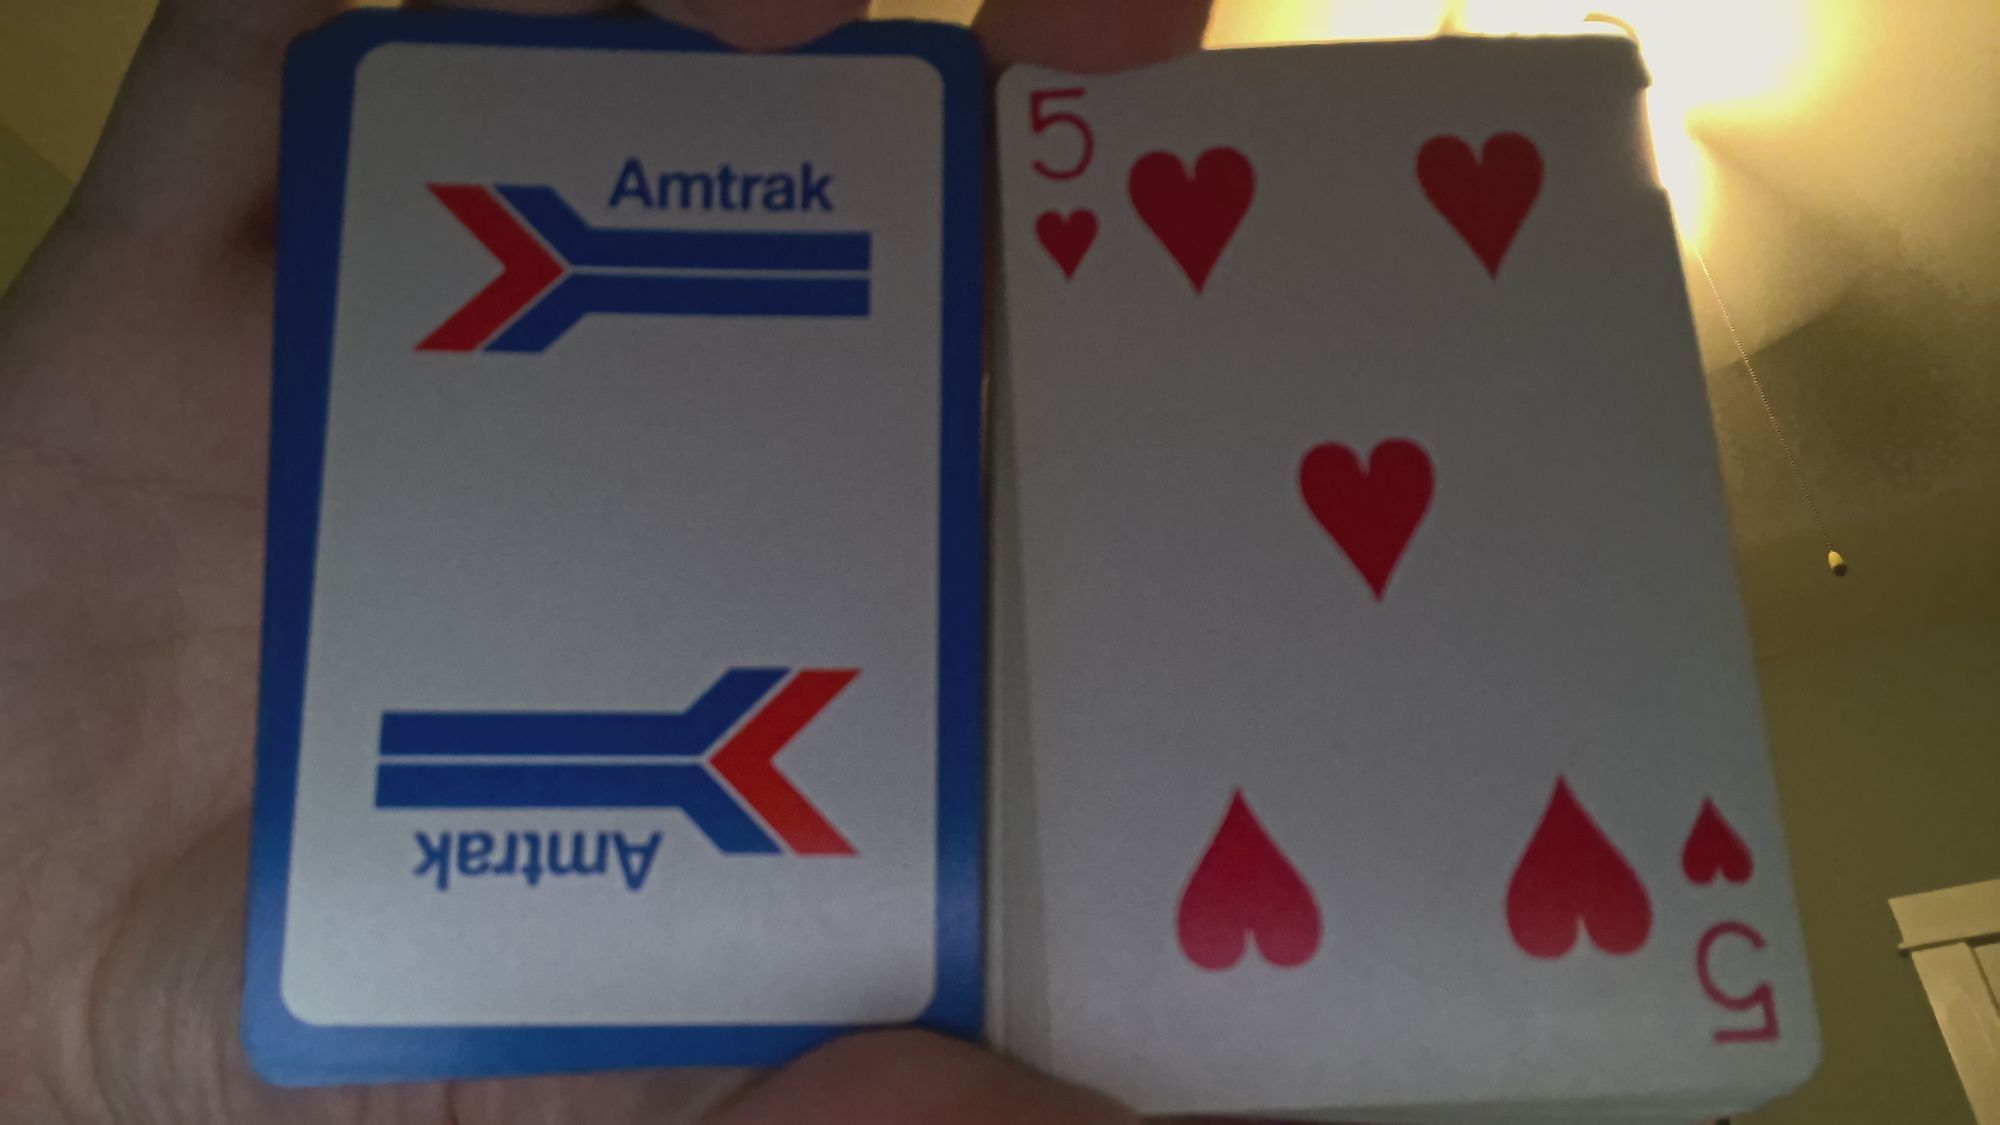 5 of hearts. From a vintage 1970s Amtrak playing card deck by USPC.